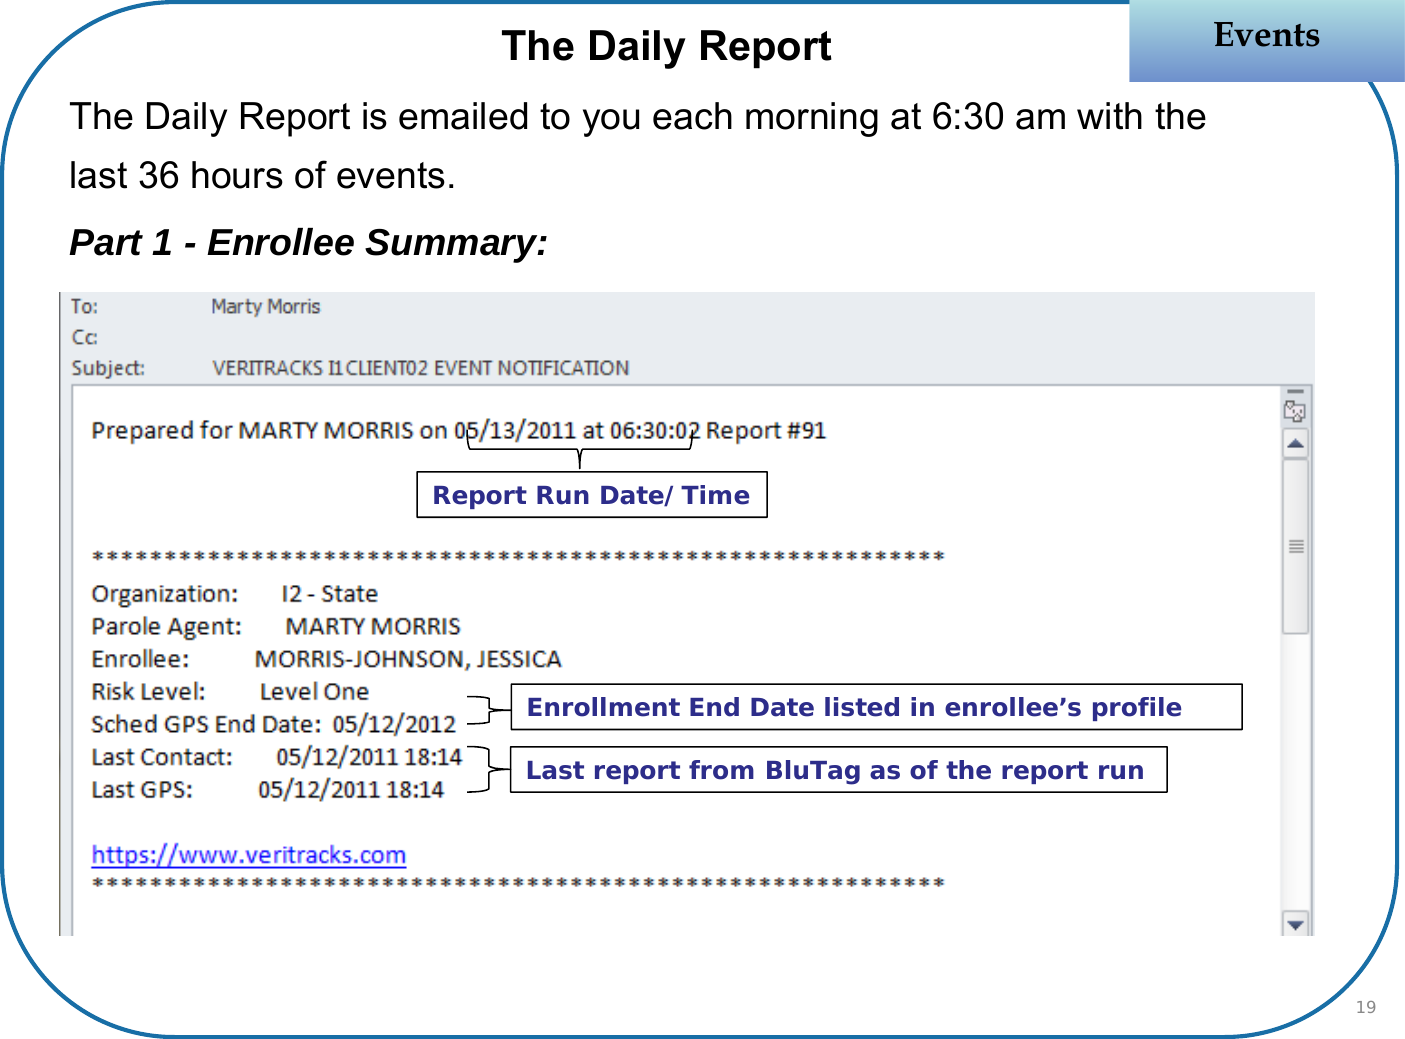 The Daily ReportThe Daily Report is emailed to you each morning at 6:30 am with the last 36 hours of events. Part 1 - Enrollee Summary:EventsEventsEnrollment End Date listed in enrollee’s profile Last report from BluTag as of the report runReport Run Date/Time19